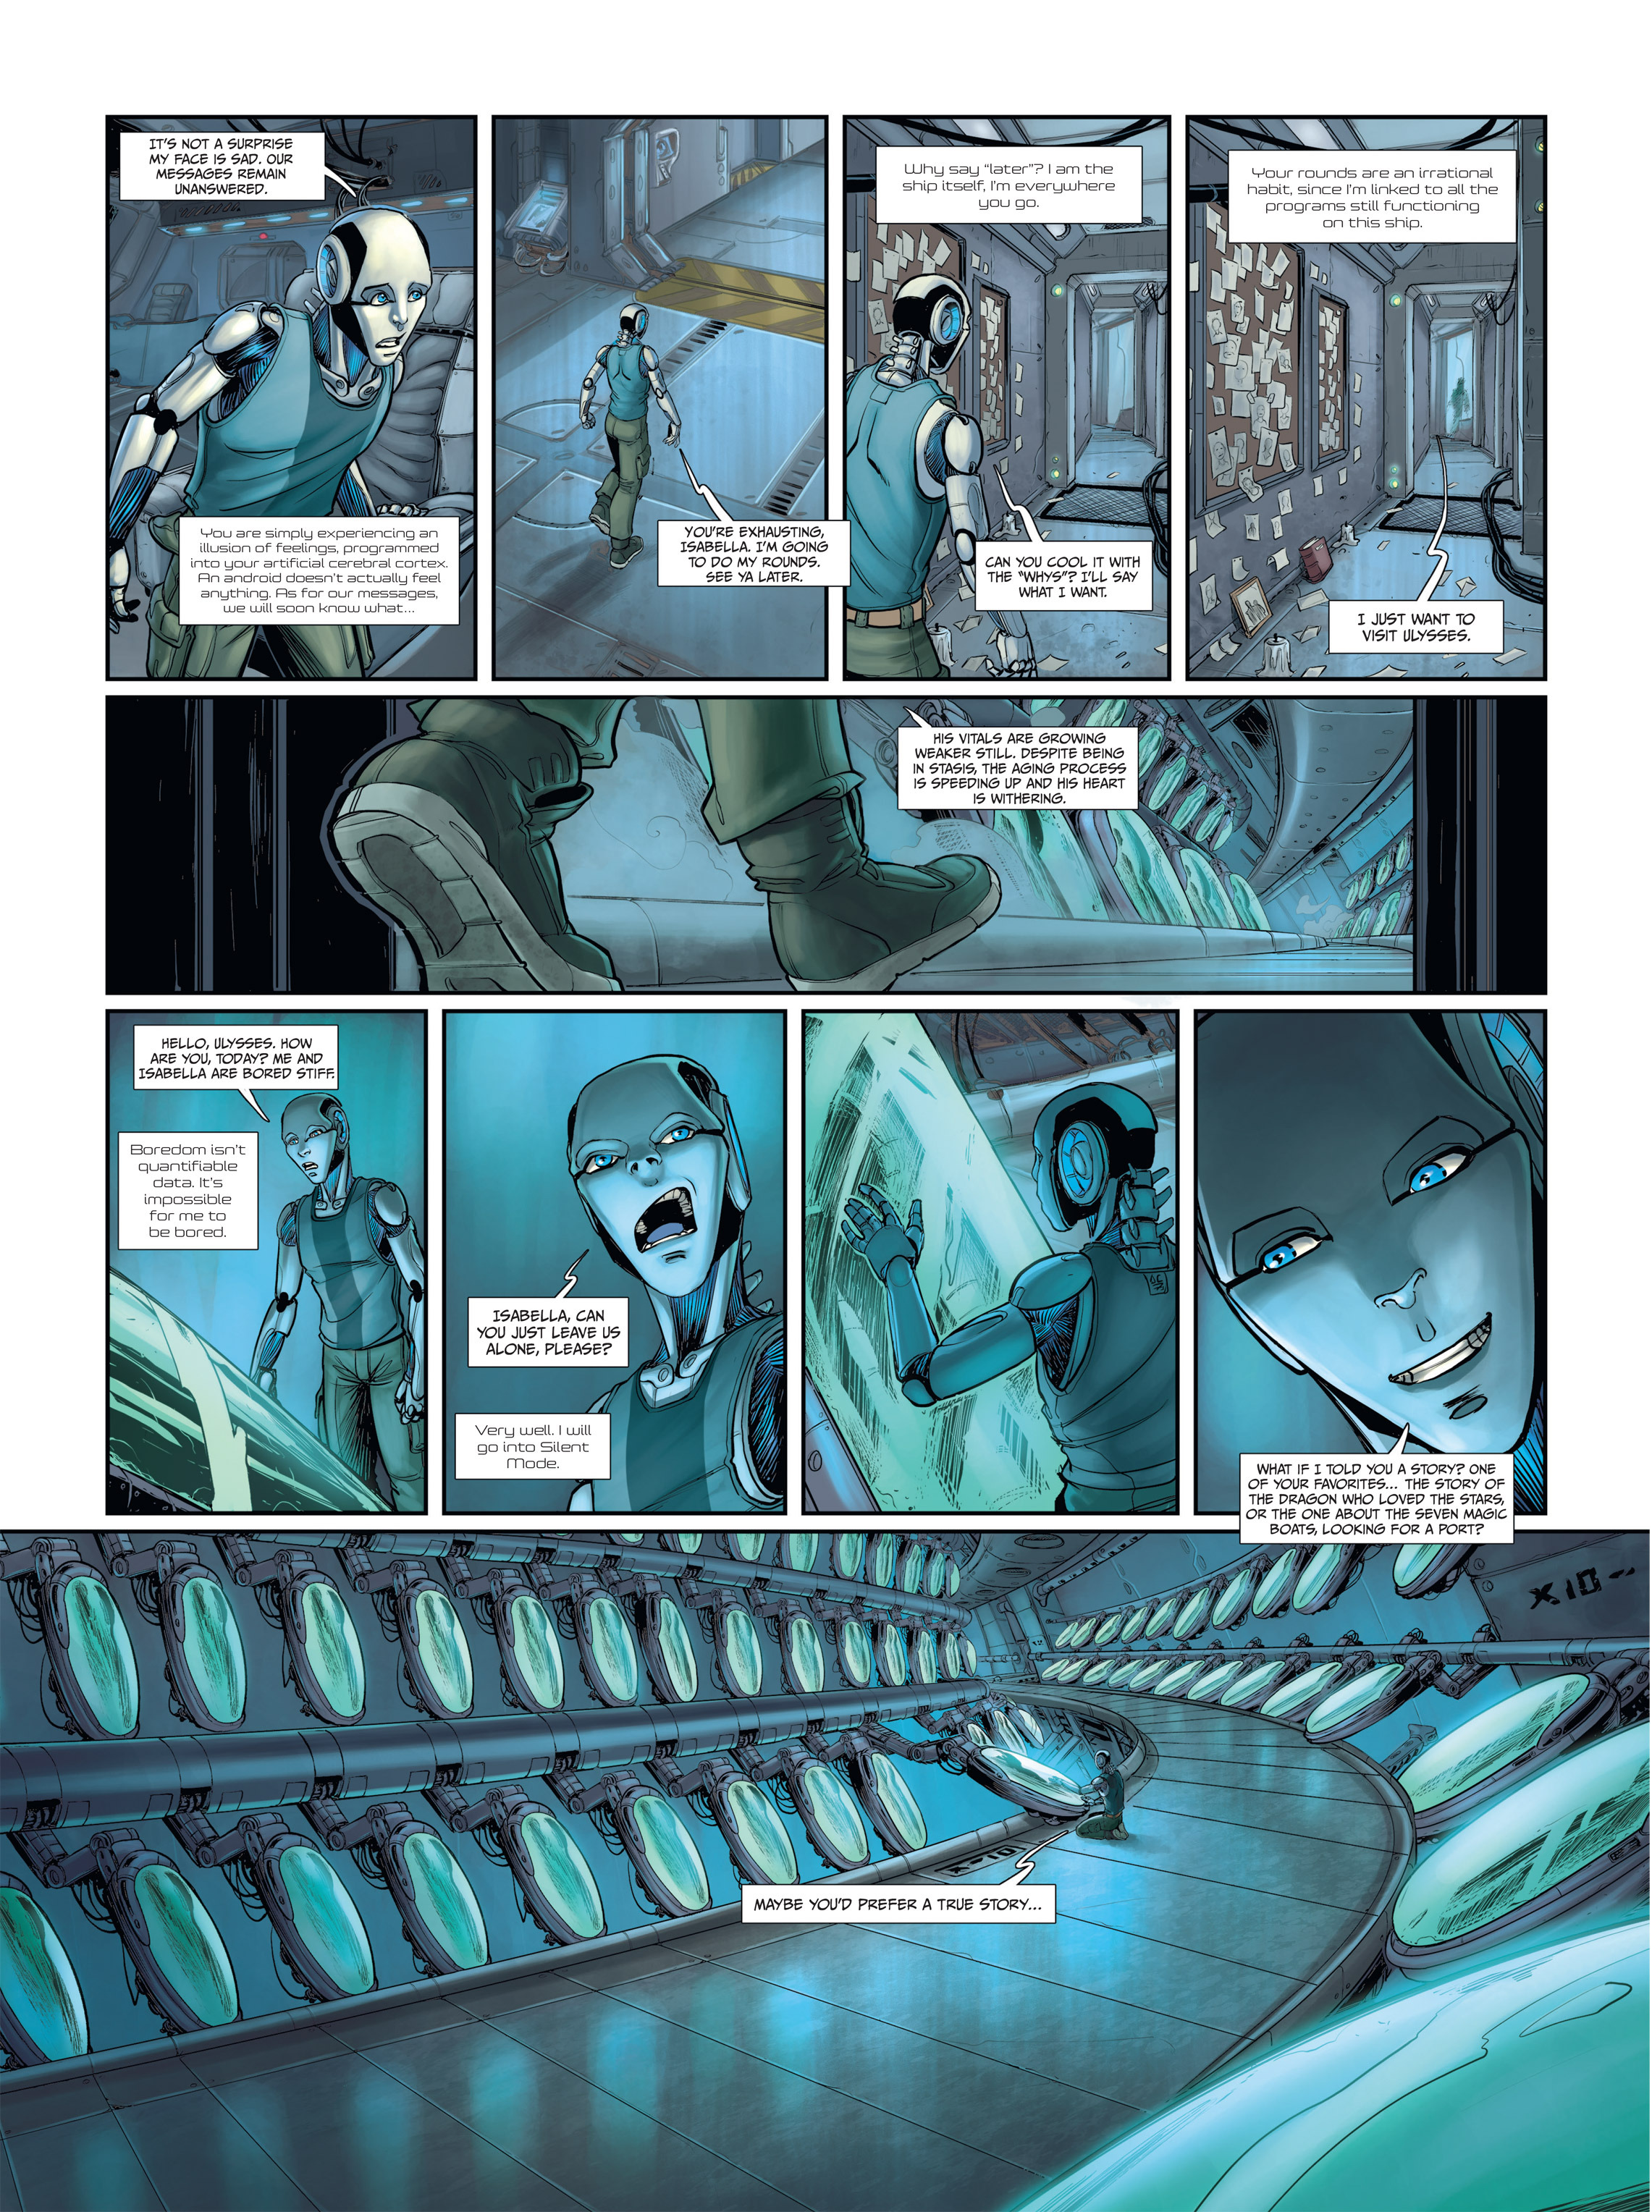 Androids (2016-): Chapter 2 - Page 4